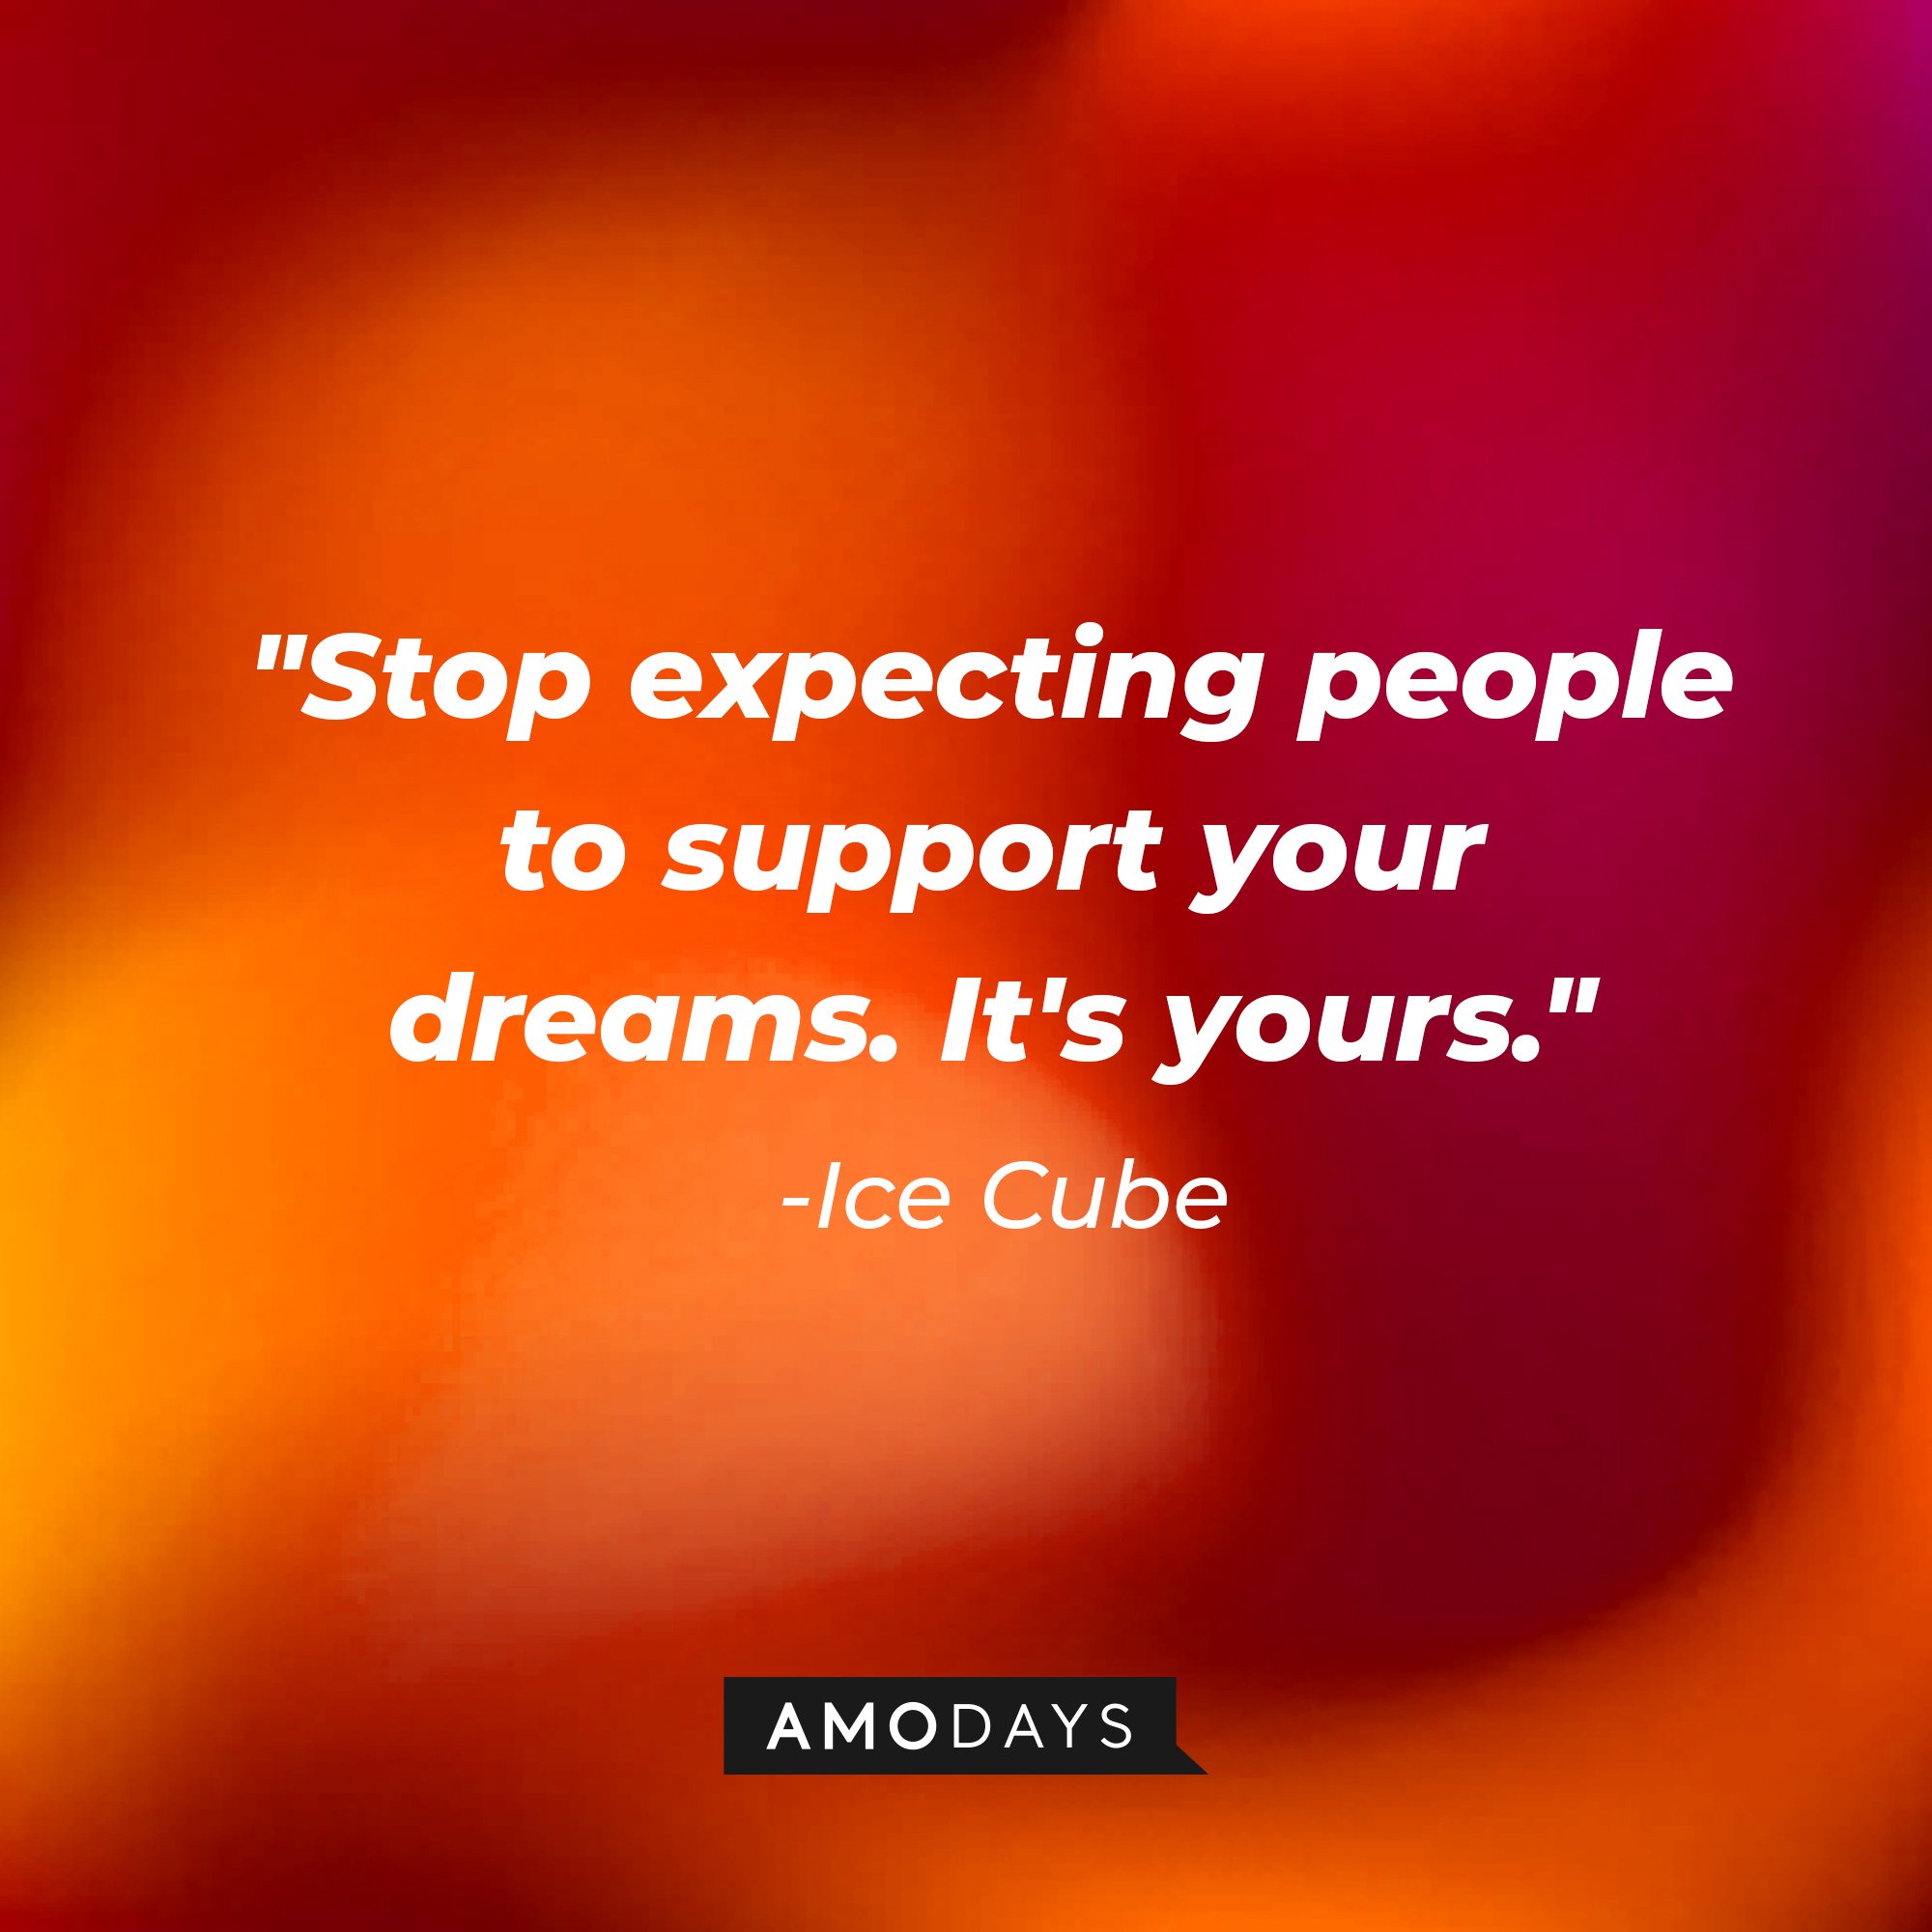 Ice Cube's quote: "Stop expecting people to support your dreams. It's yours." — Ice Cube | Image: AmoDays